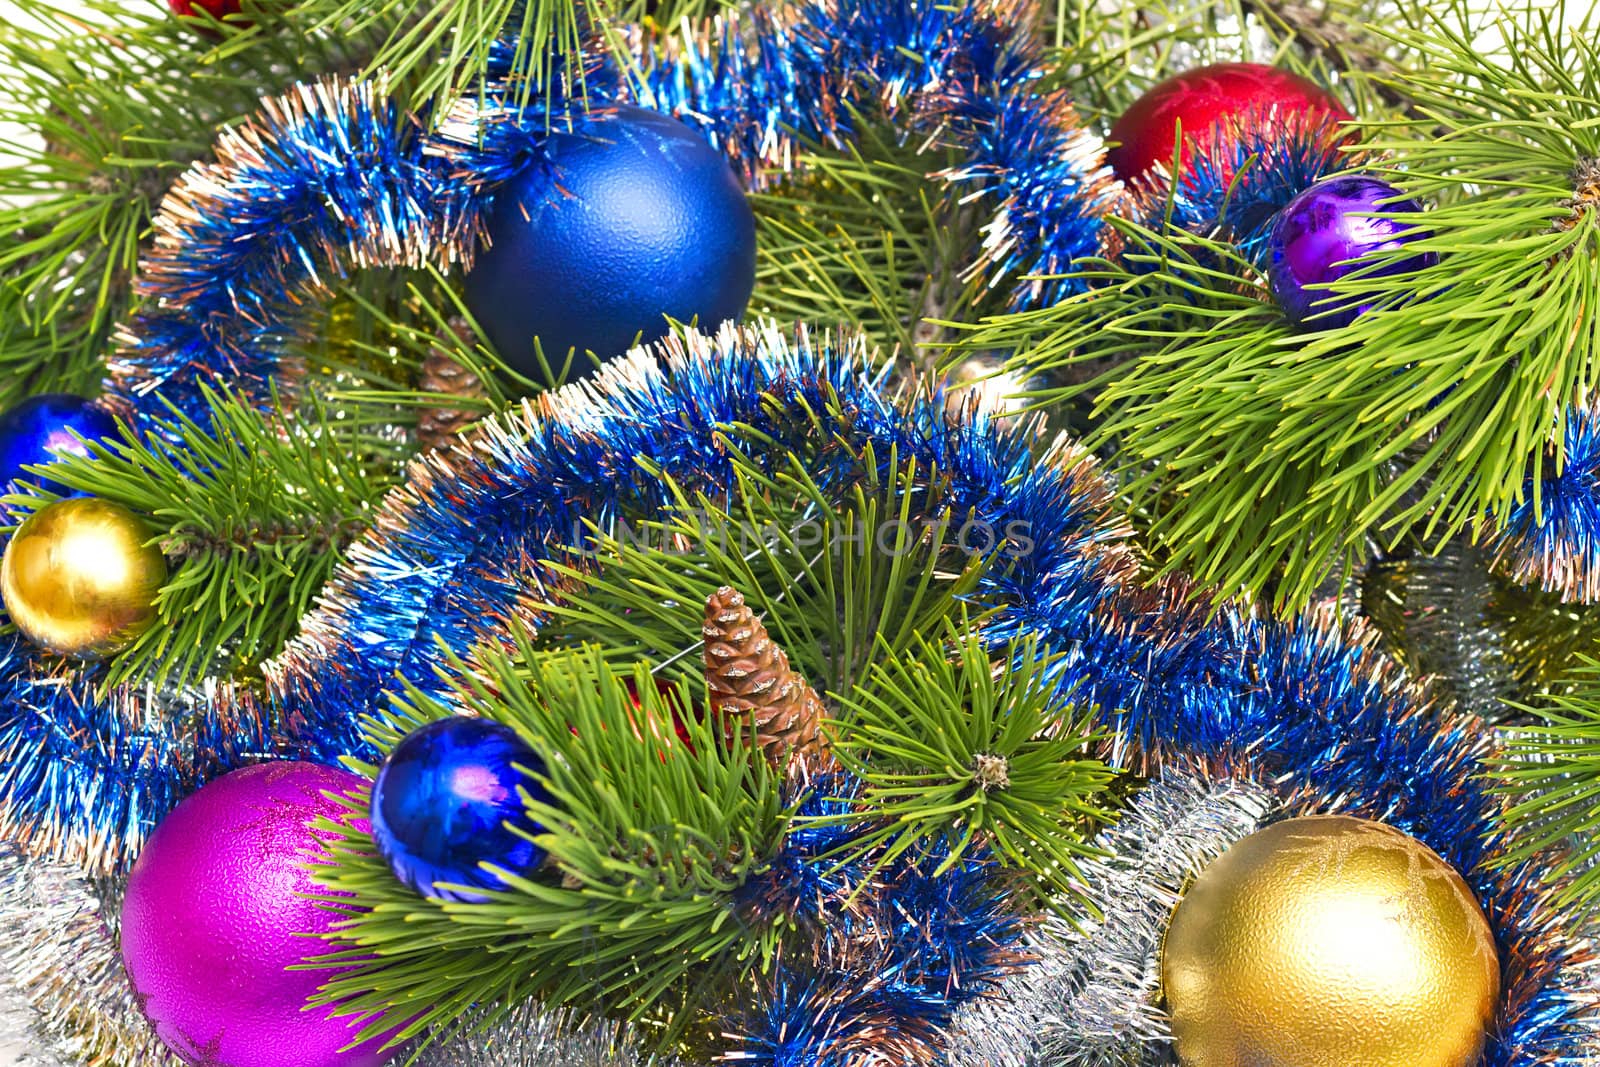 pine branch with cones and Christmas decorations in the background